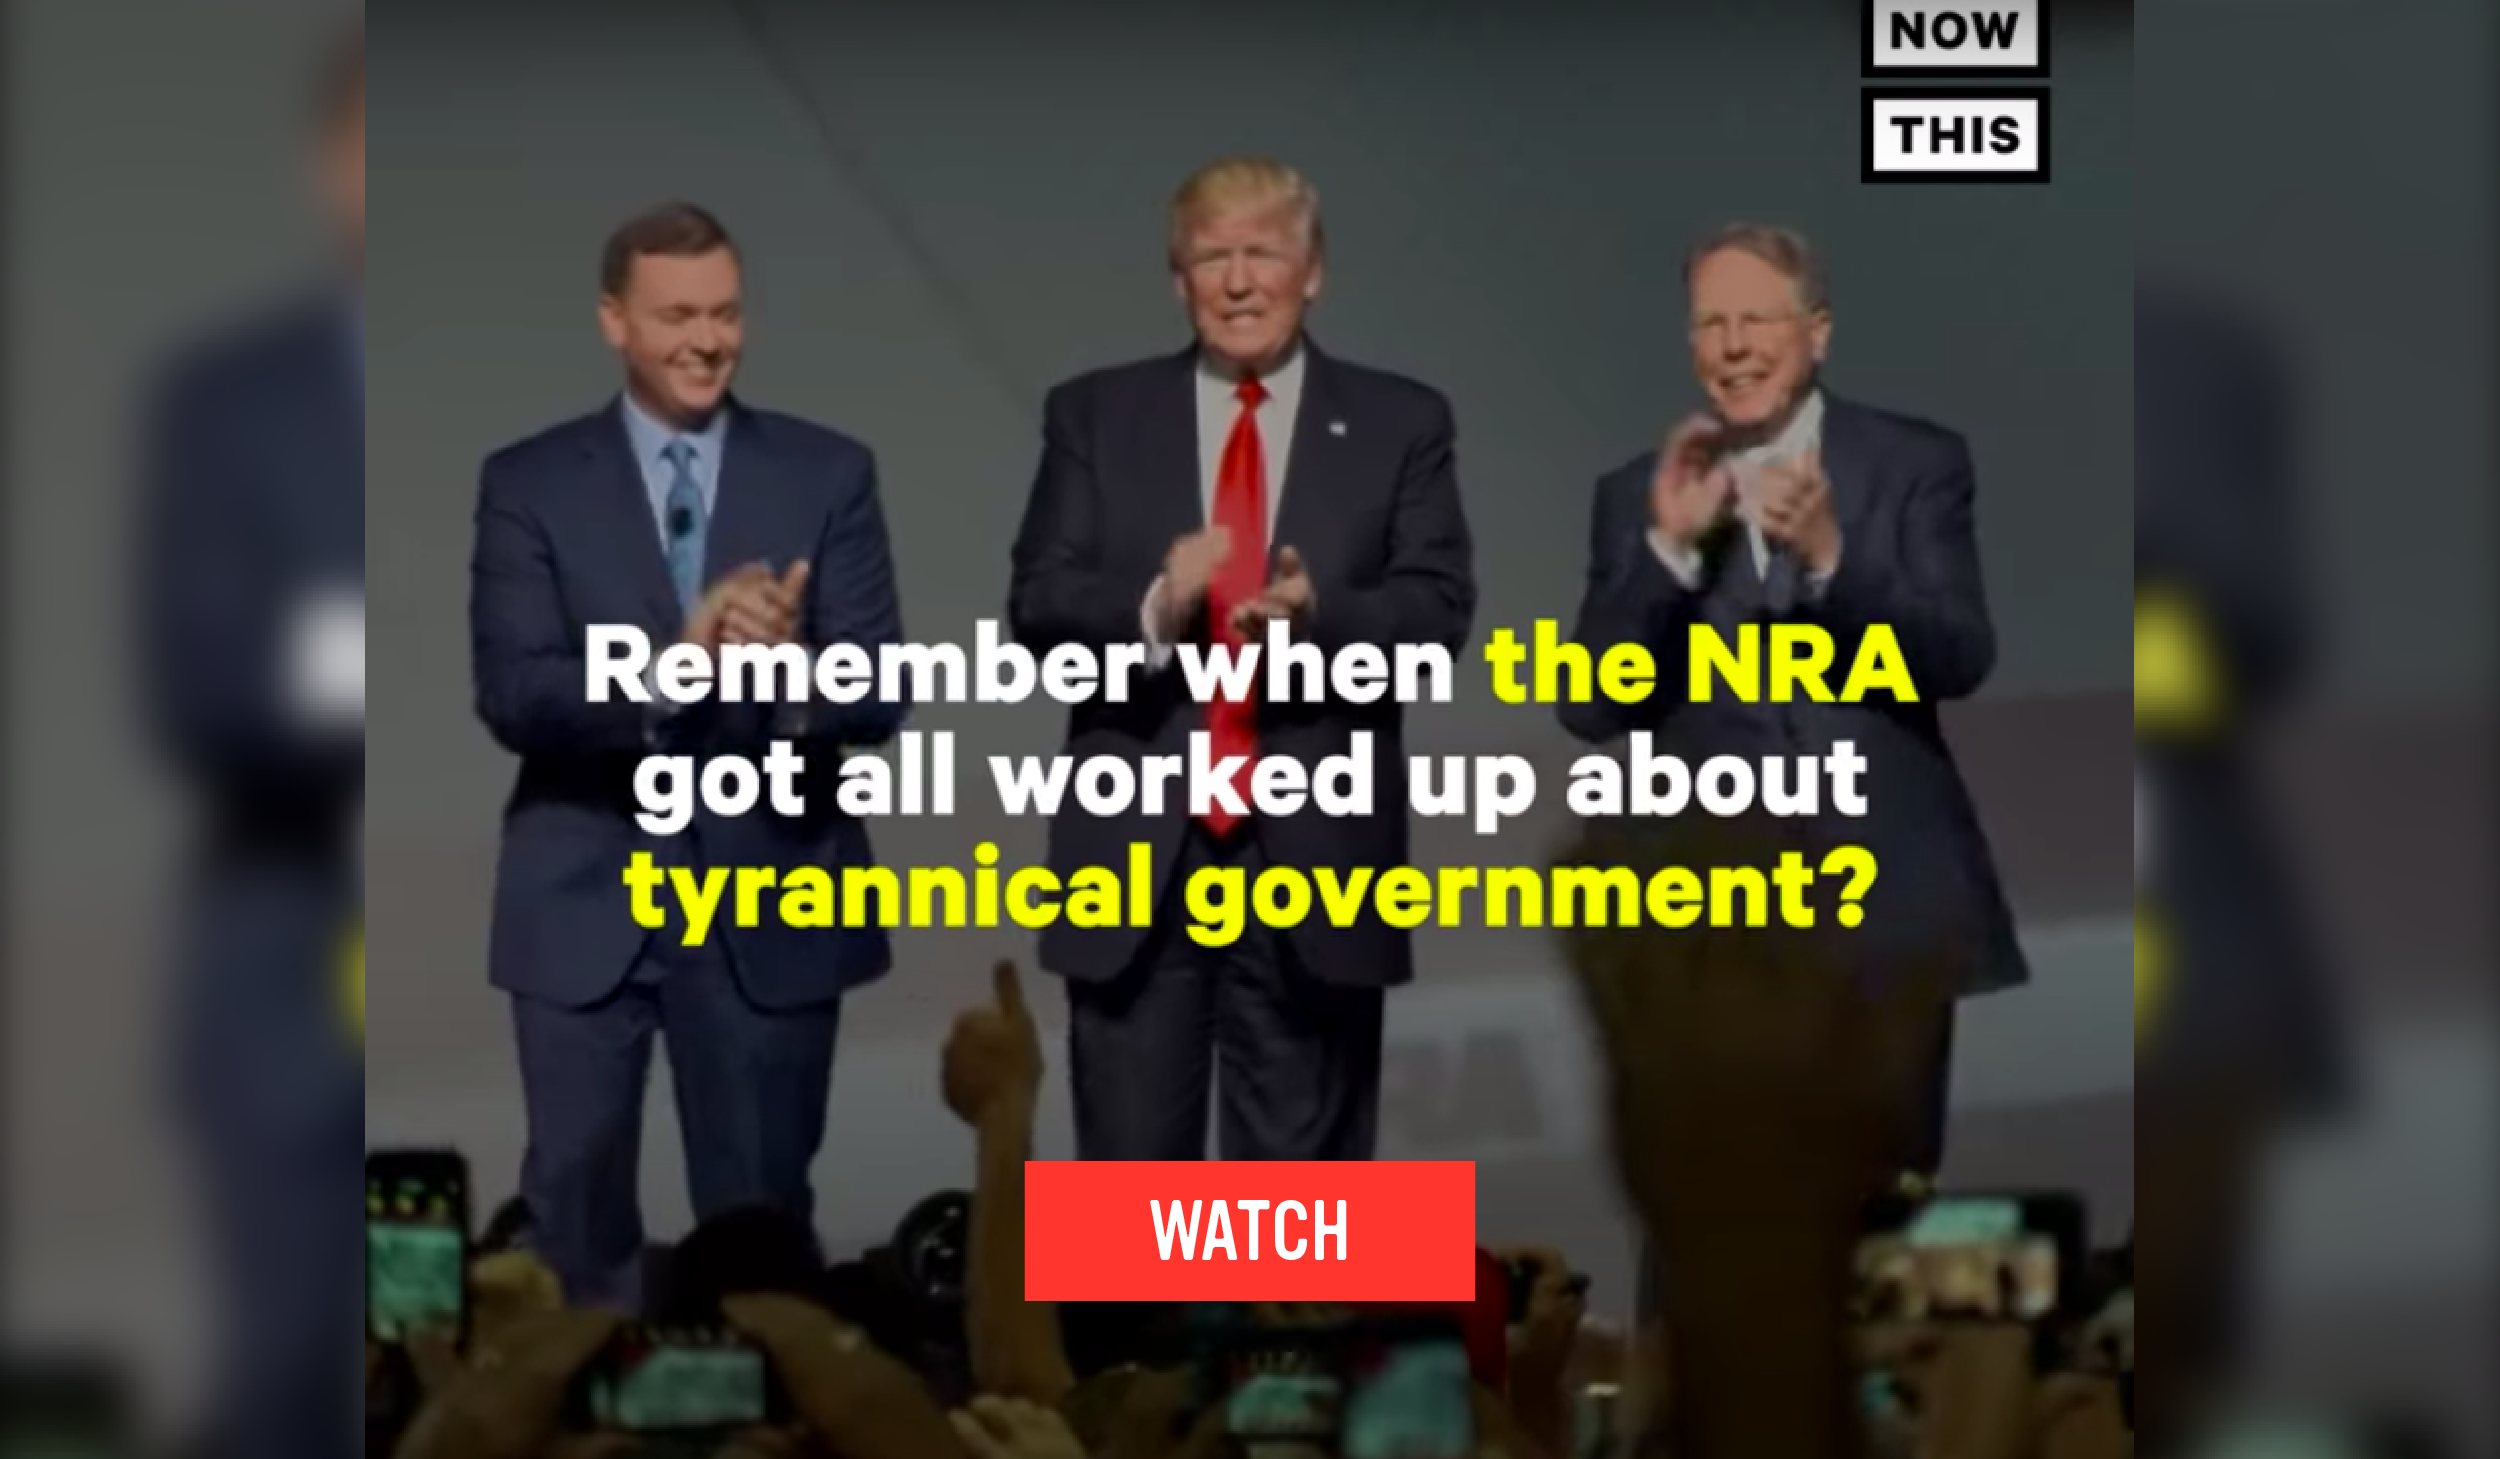 WATCH: Remember when the NRA got all worked up about tyrannical government?